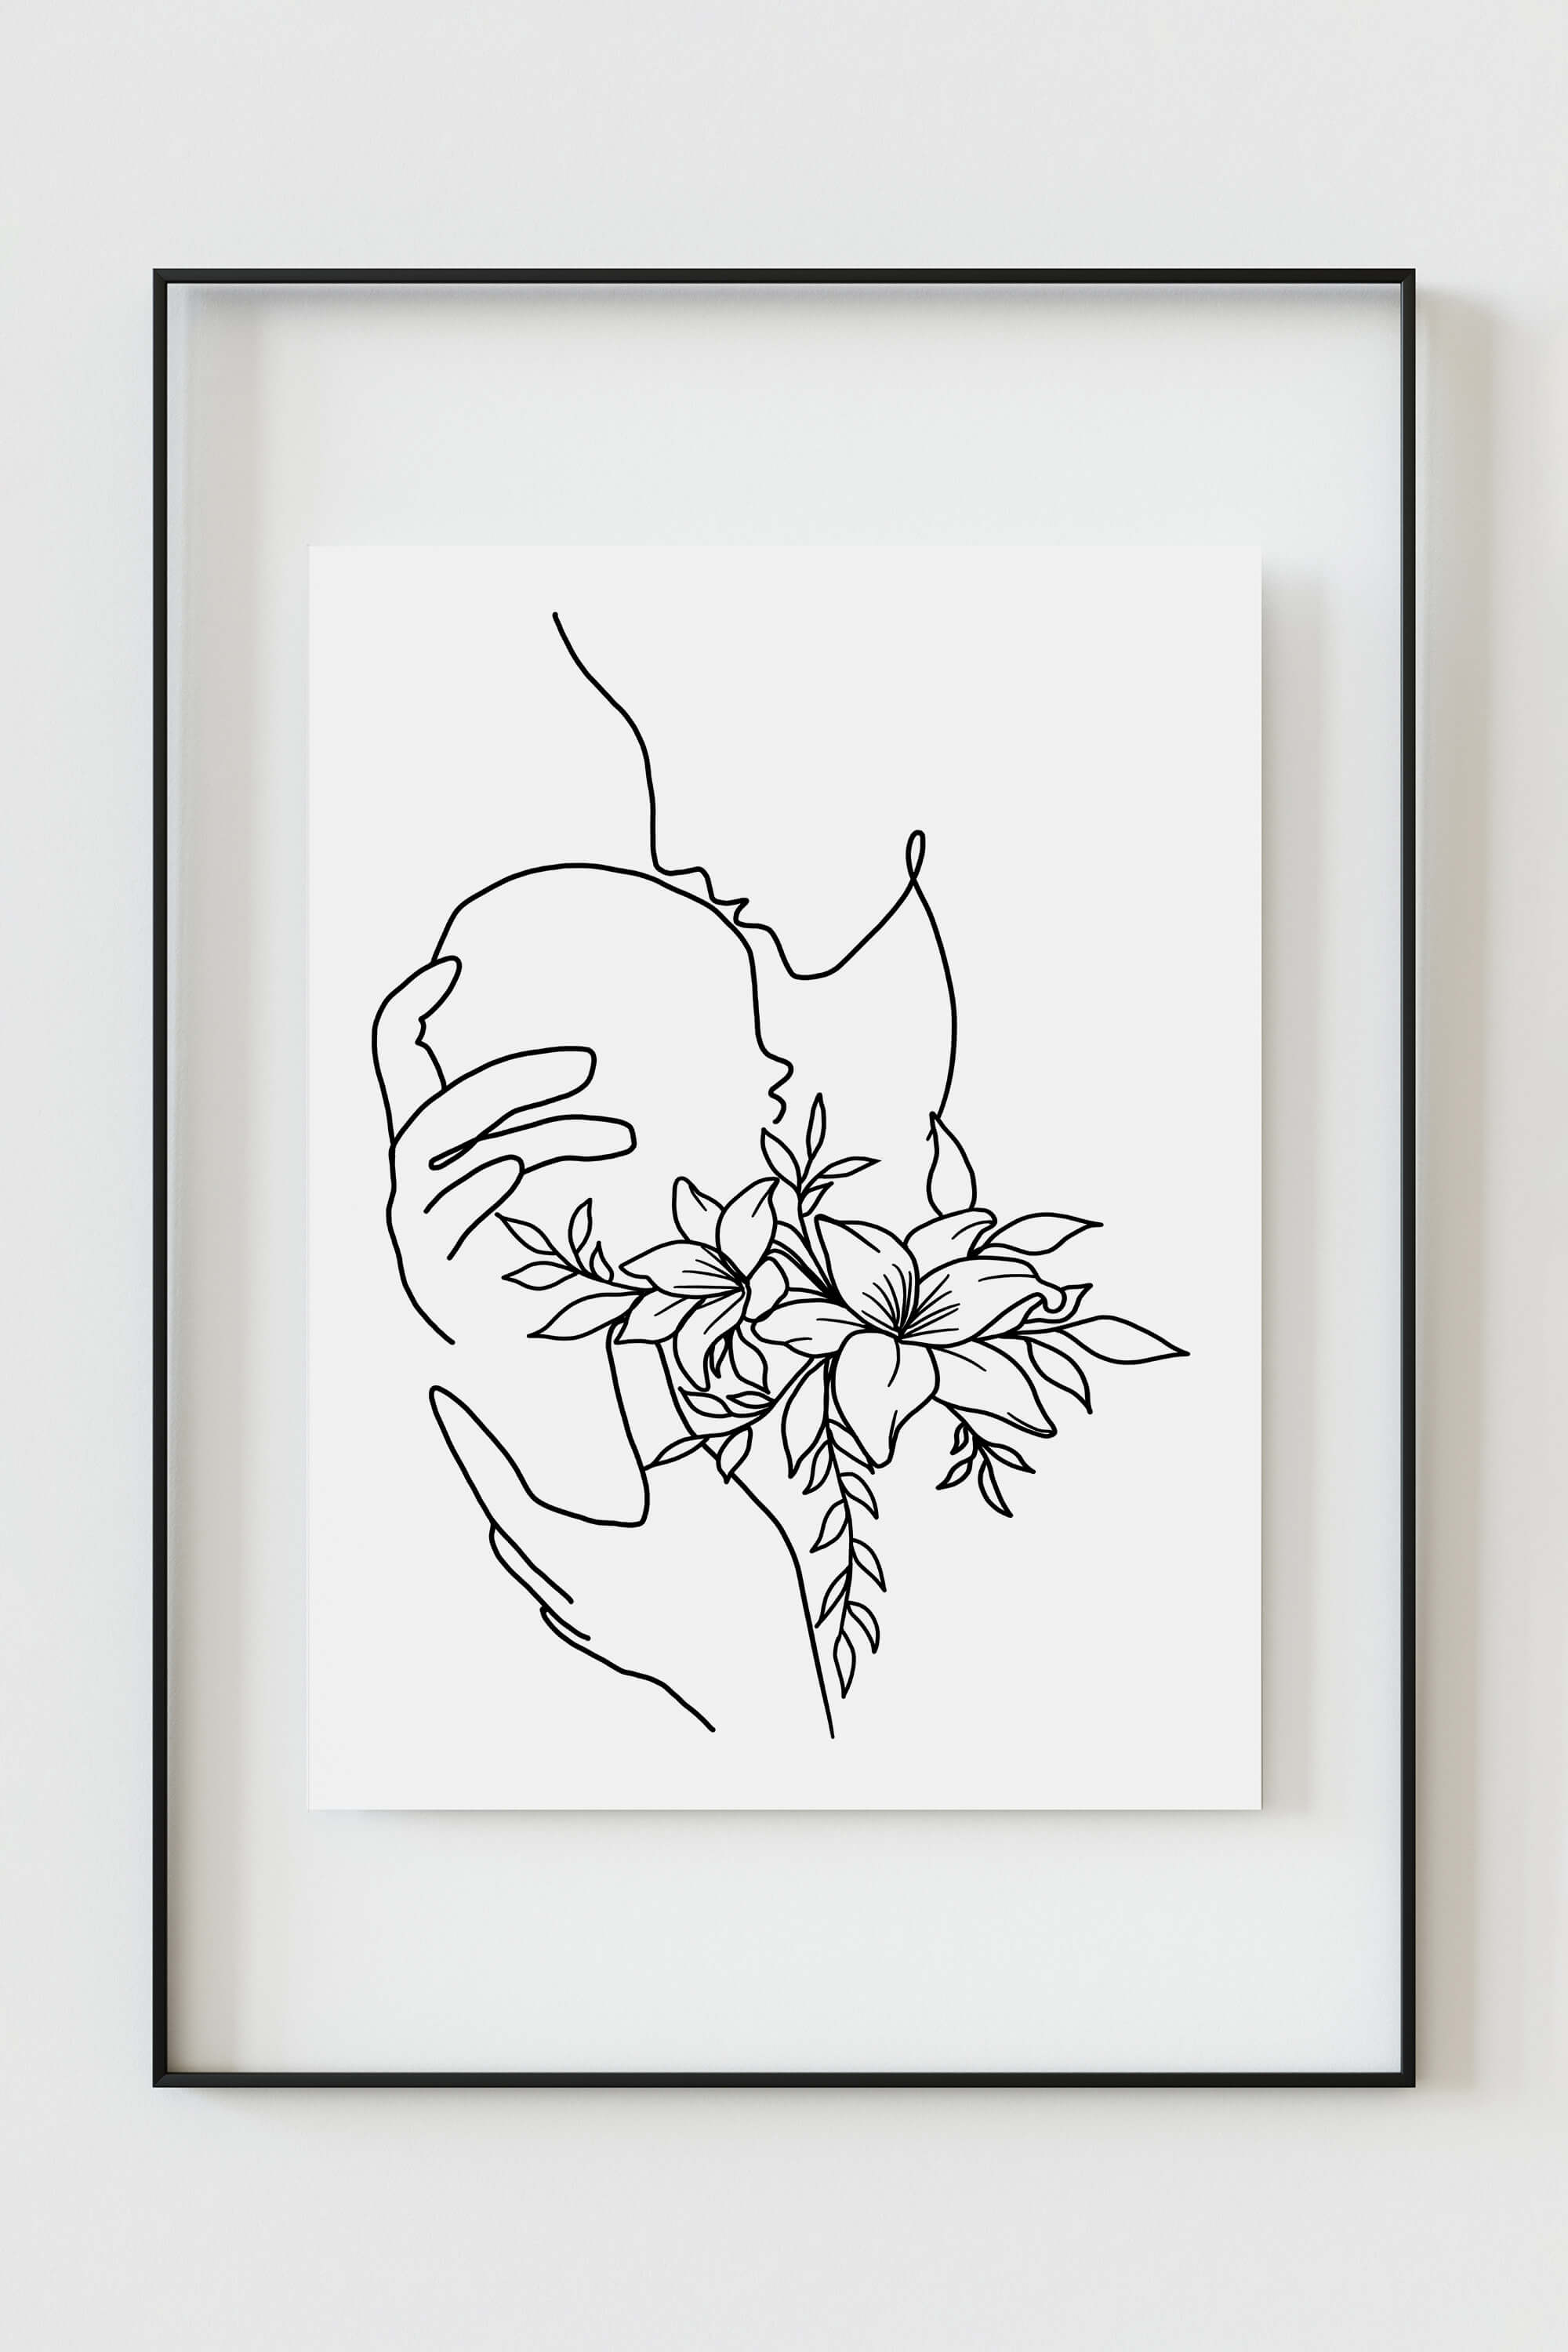 Express gratitude with this thoughtful art print featuring delicate intertwining of life and art. A unique and meaningful gift for obstetricians.